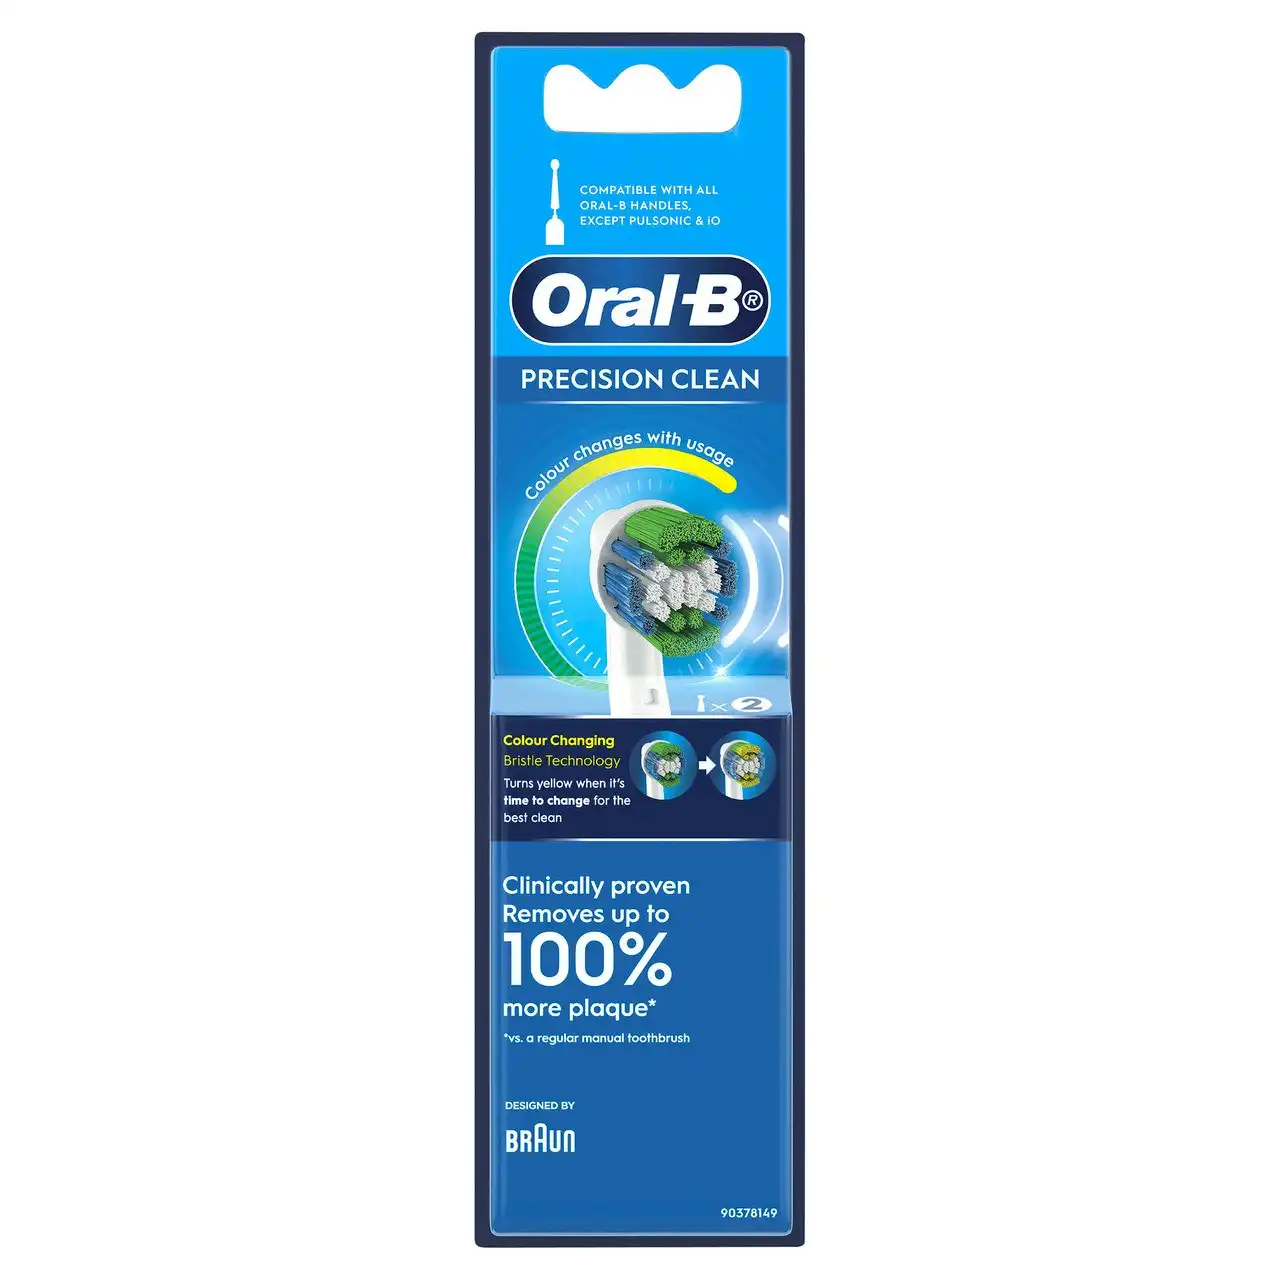 Oral-B Precision Clean White Electric Toothbrush Refills 2 Pack